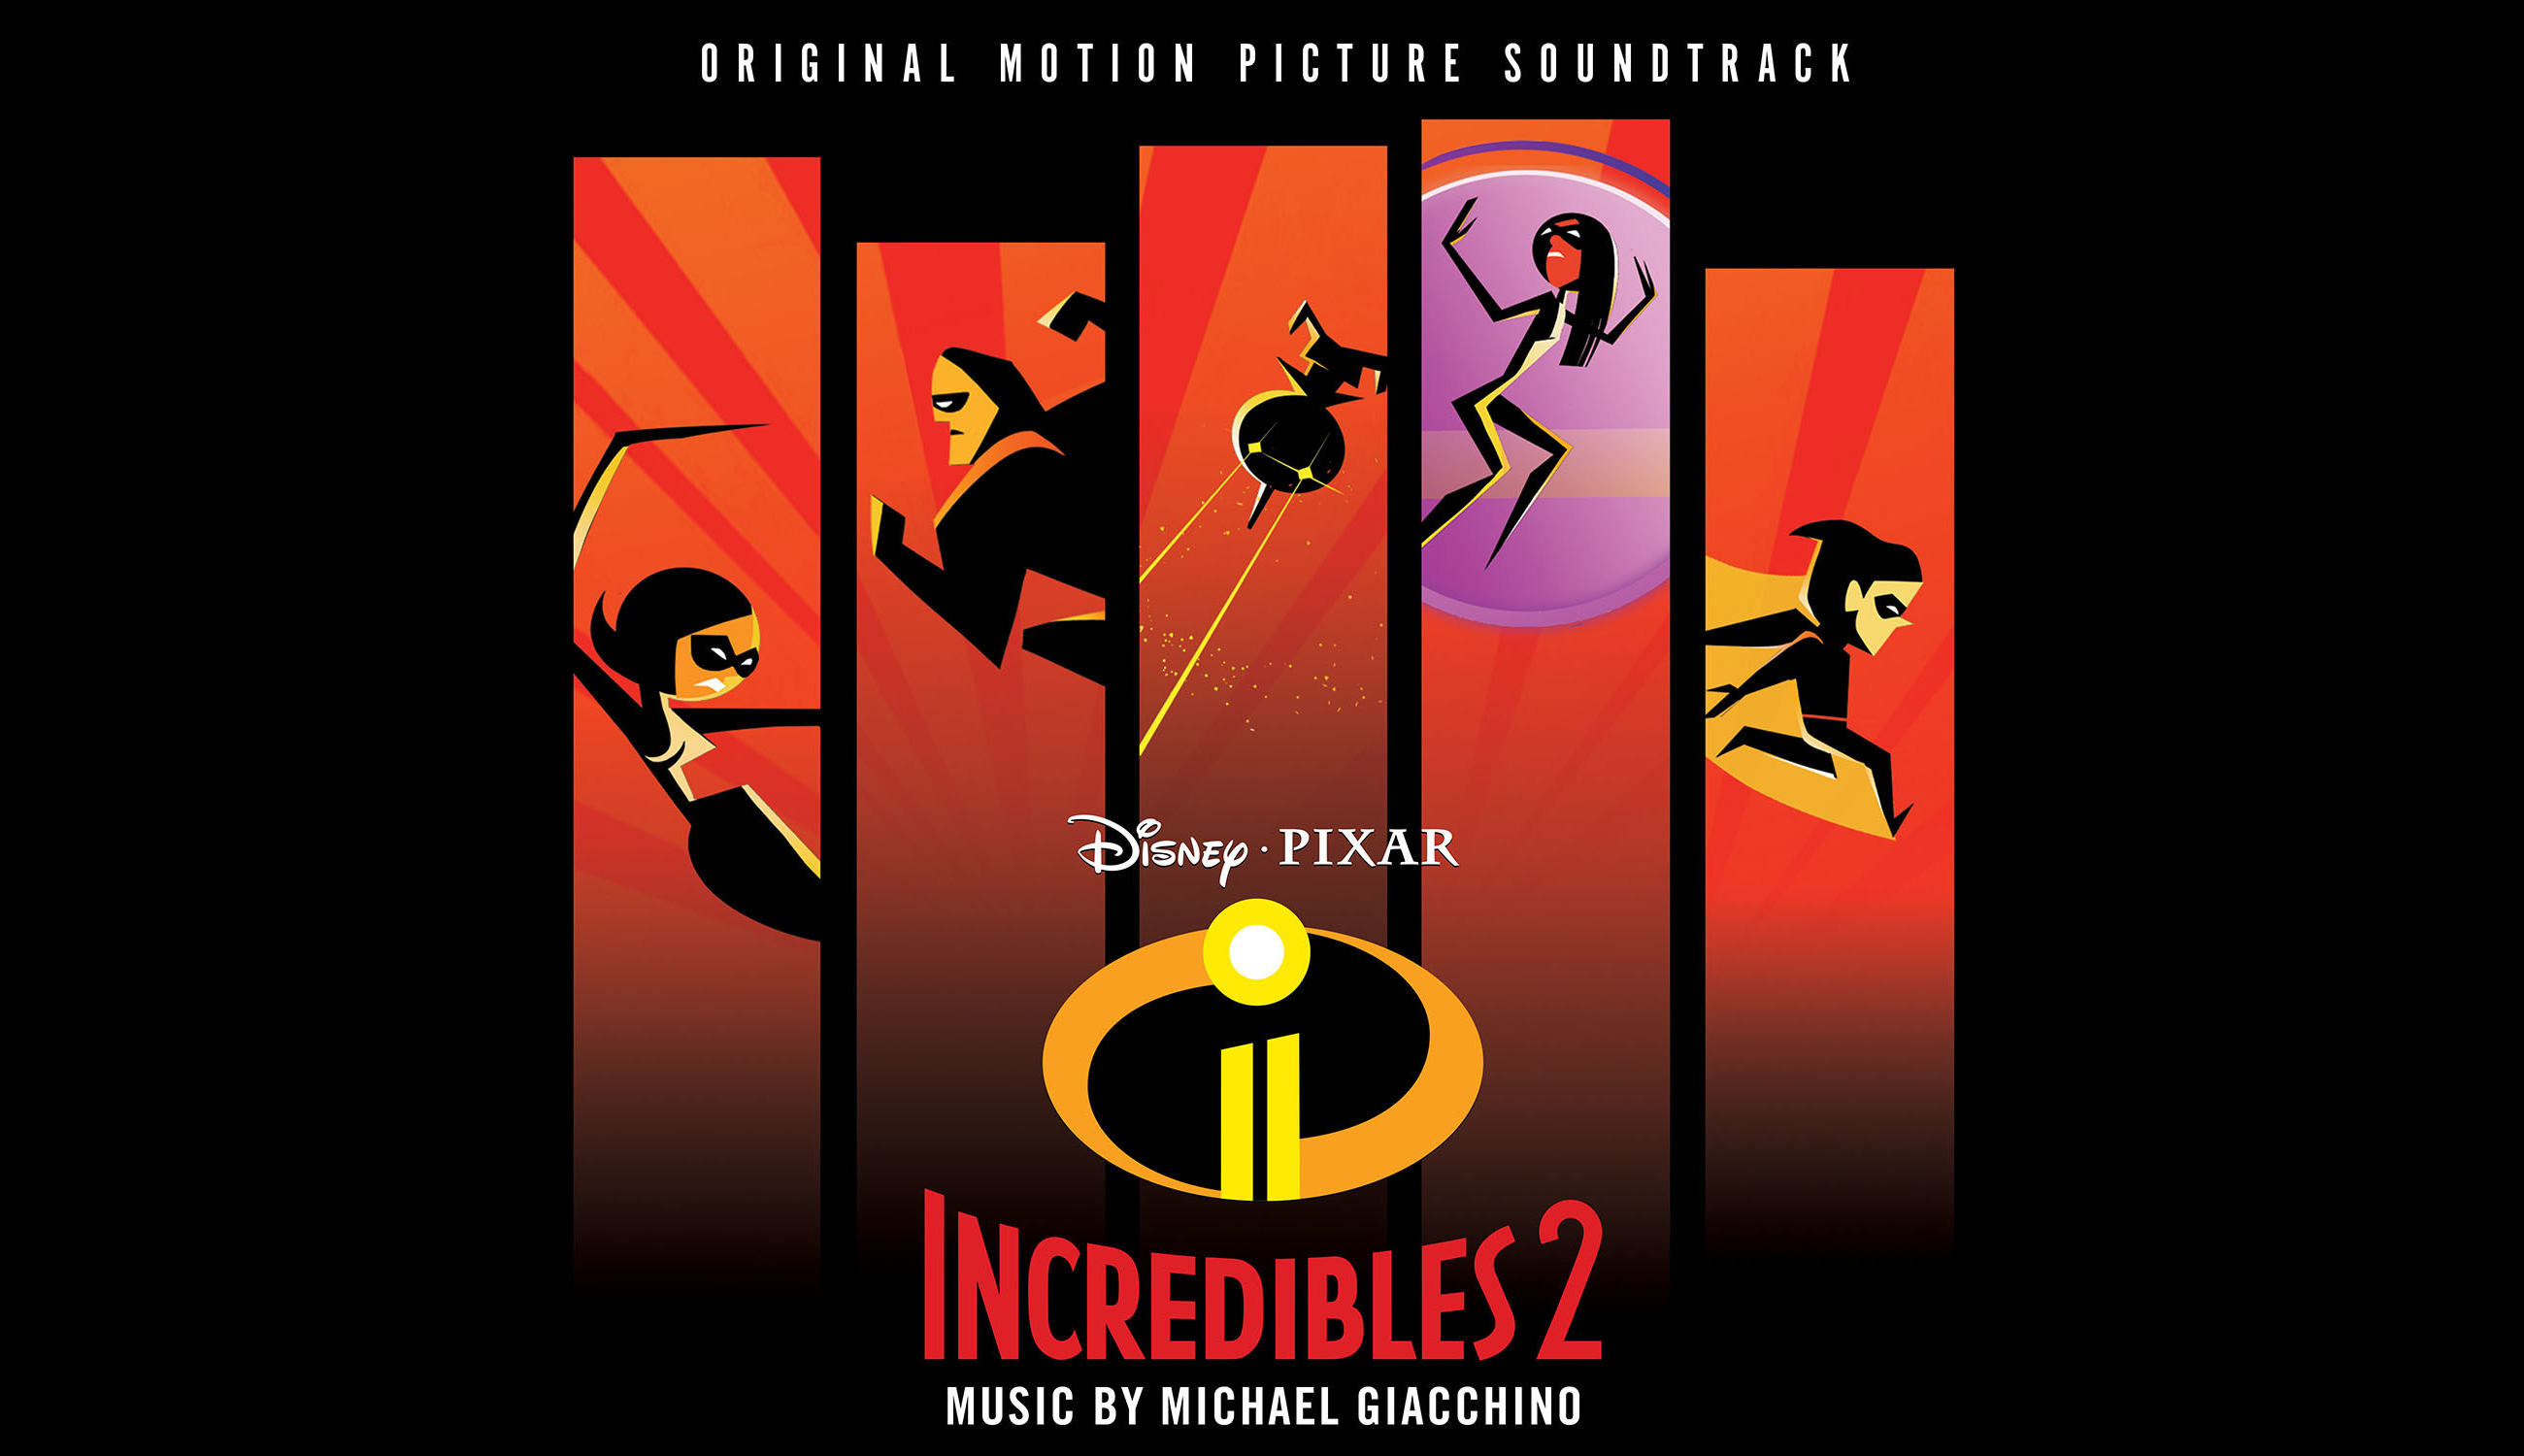 Disney•Pixar's Incredibles 2 Soundtrack Featuring Score By Oscar-Winning Composer Michael Giacchino Available